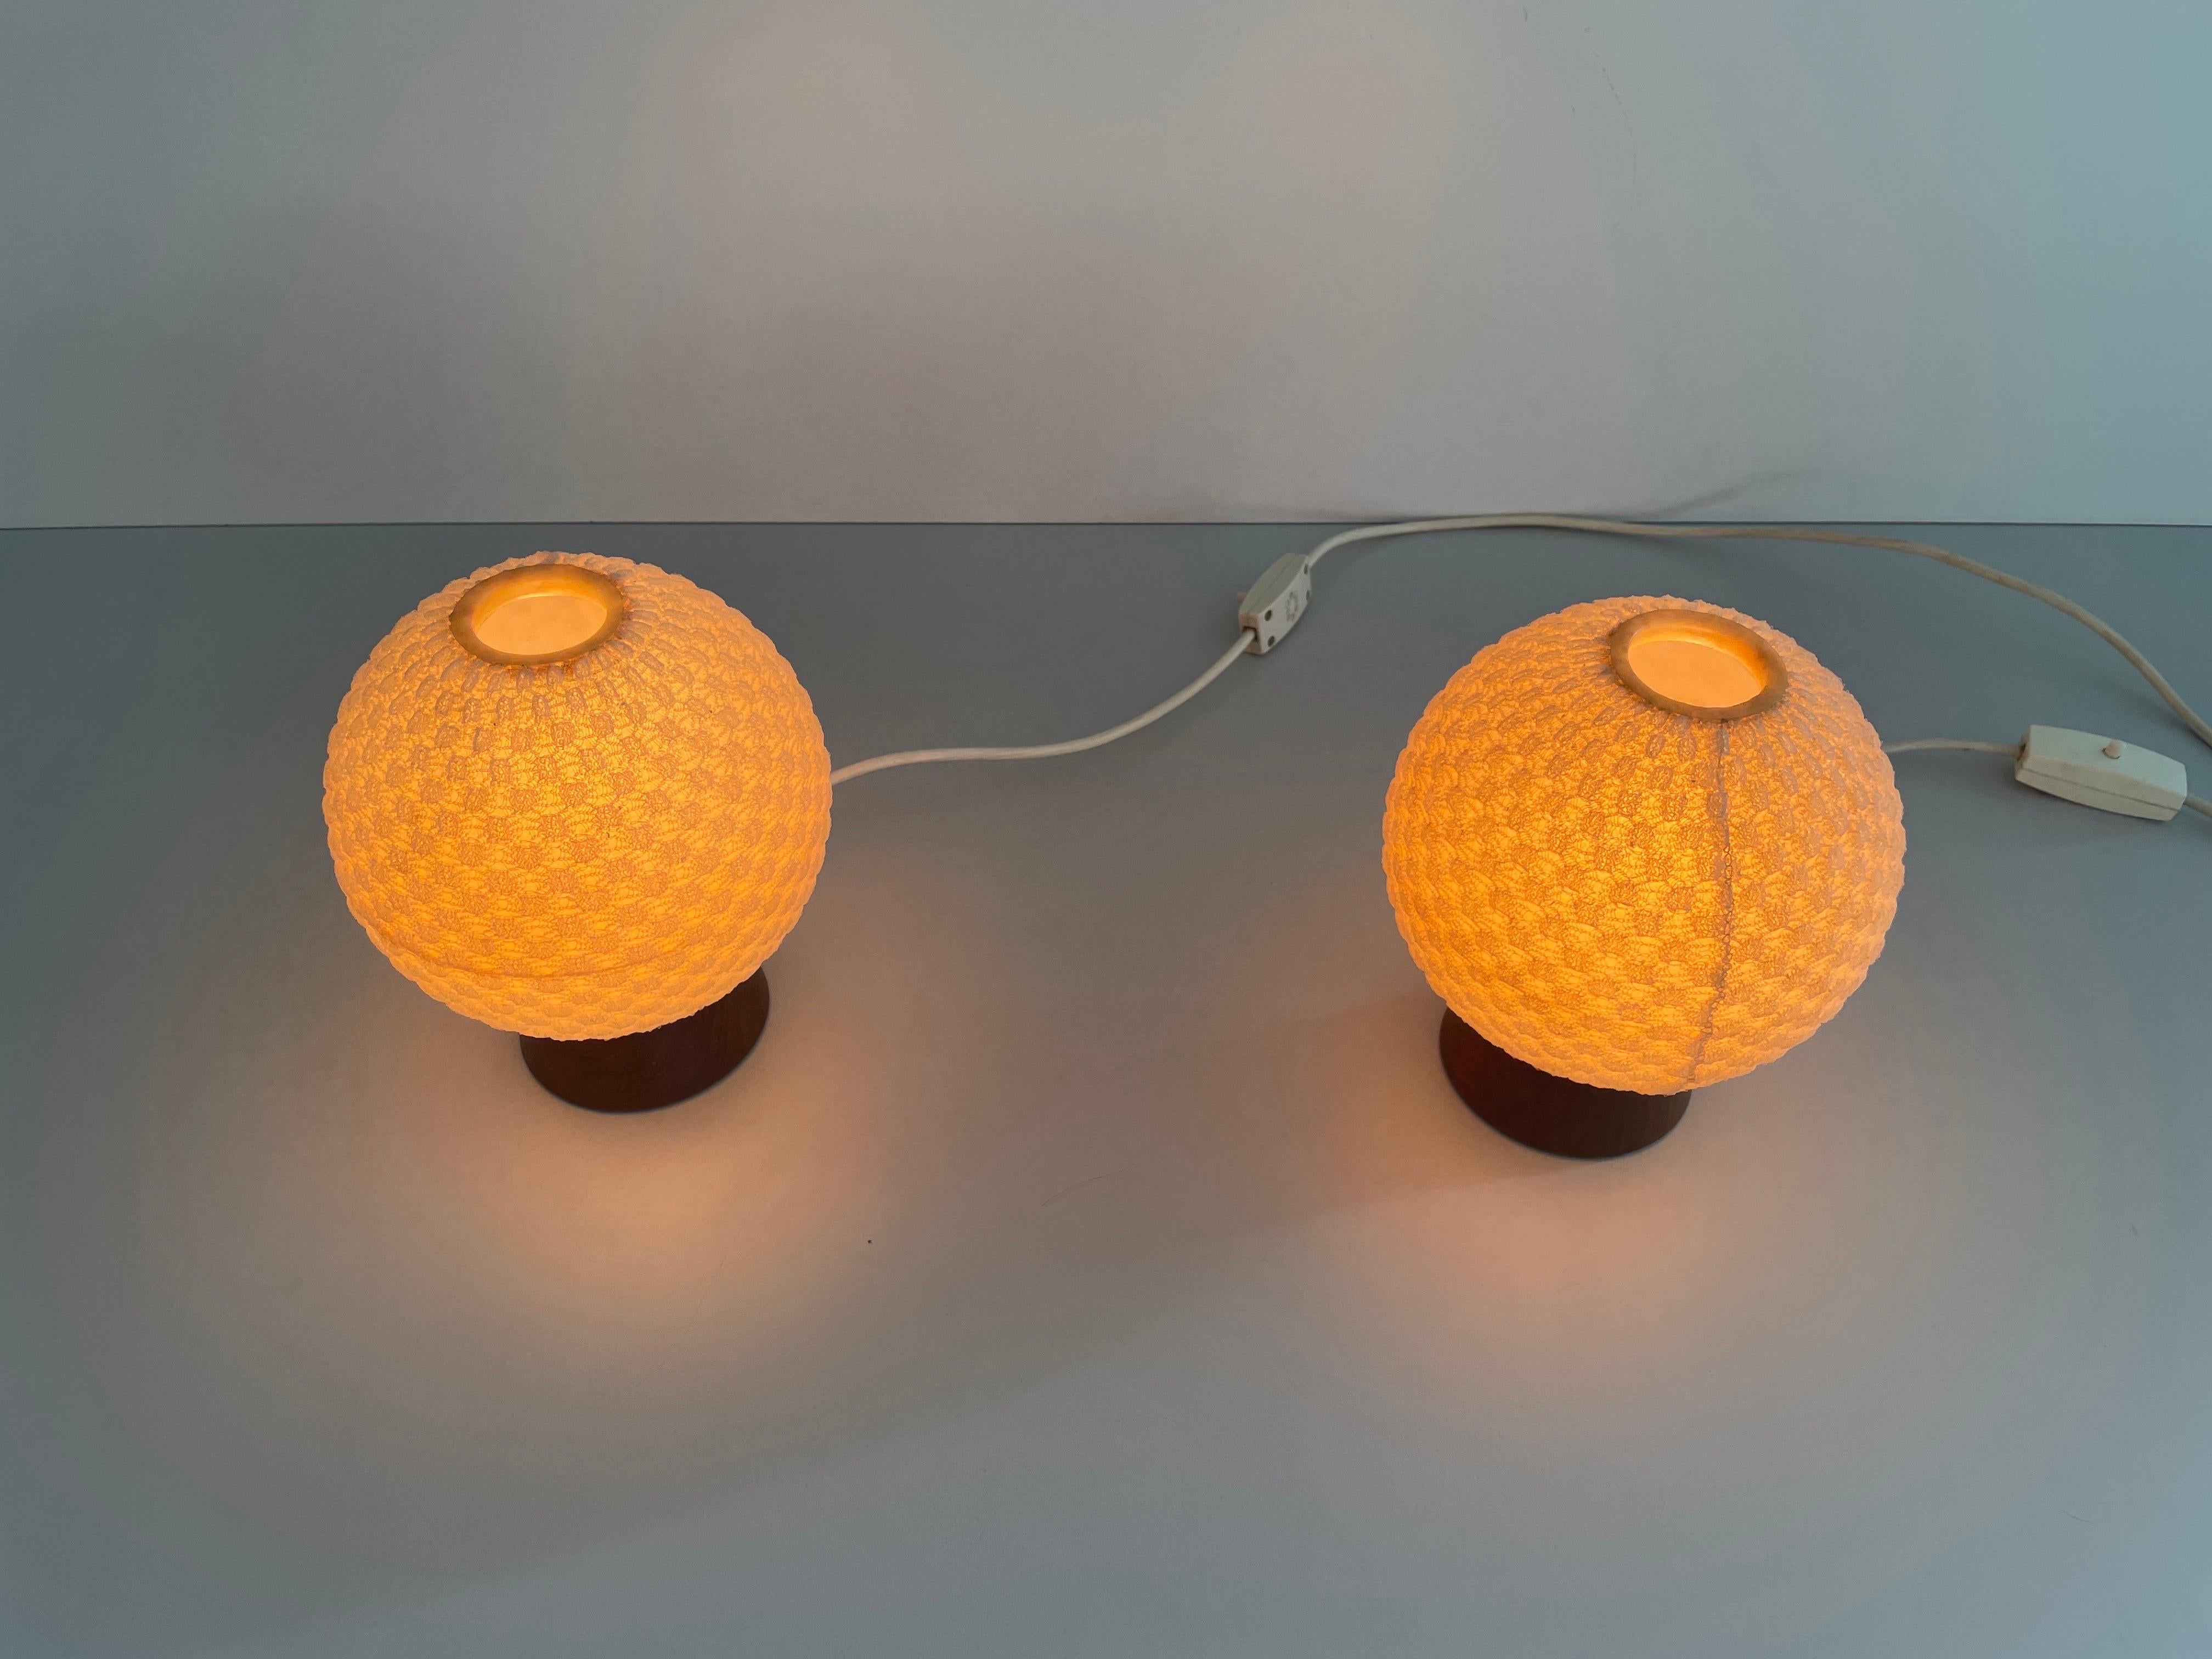 Teak & Ball Fabric Shade Pair of Bedside Lamps by Temde, 1960s Germany For Sale 7